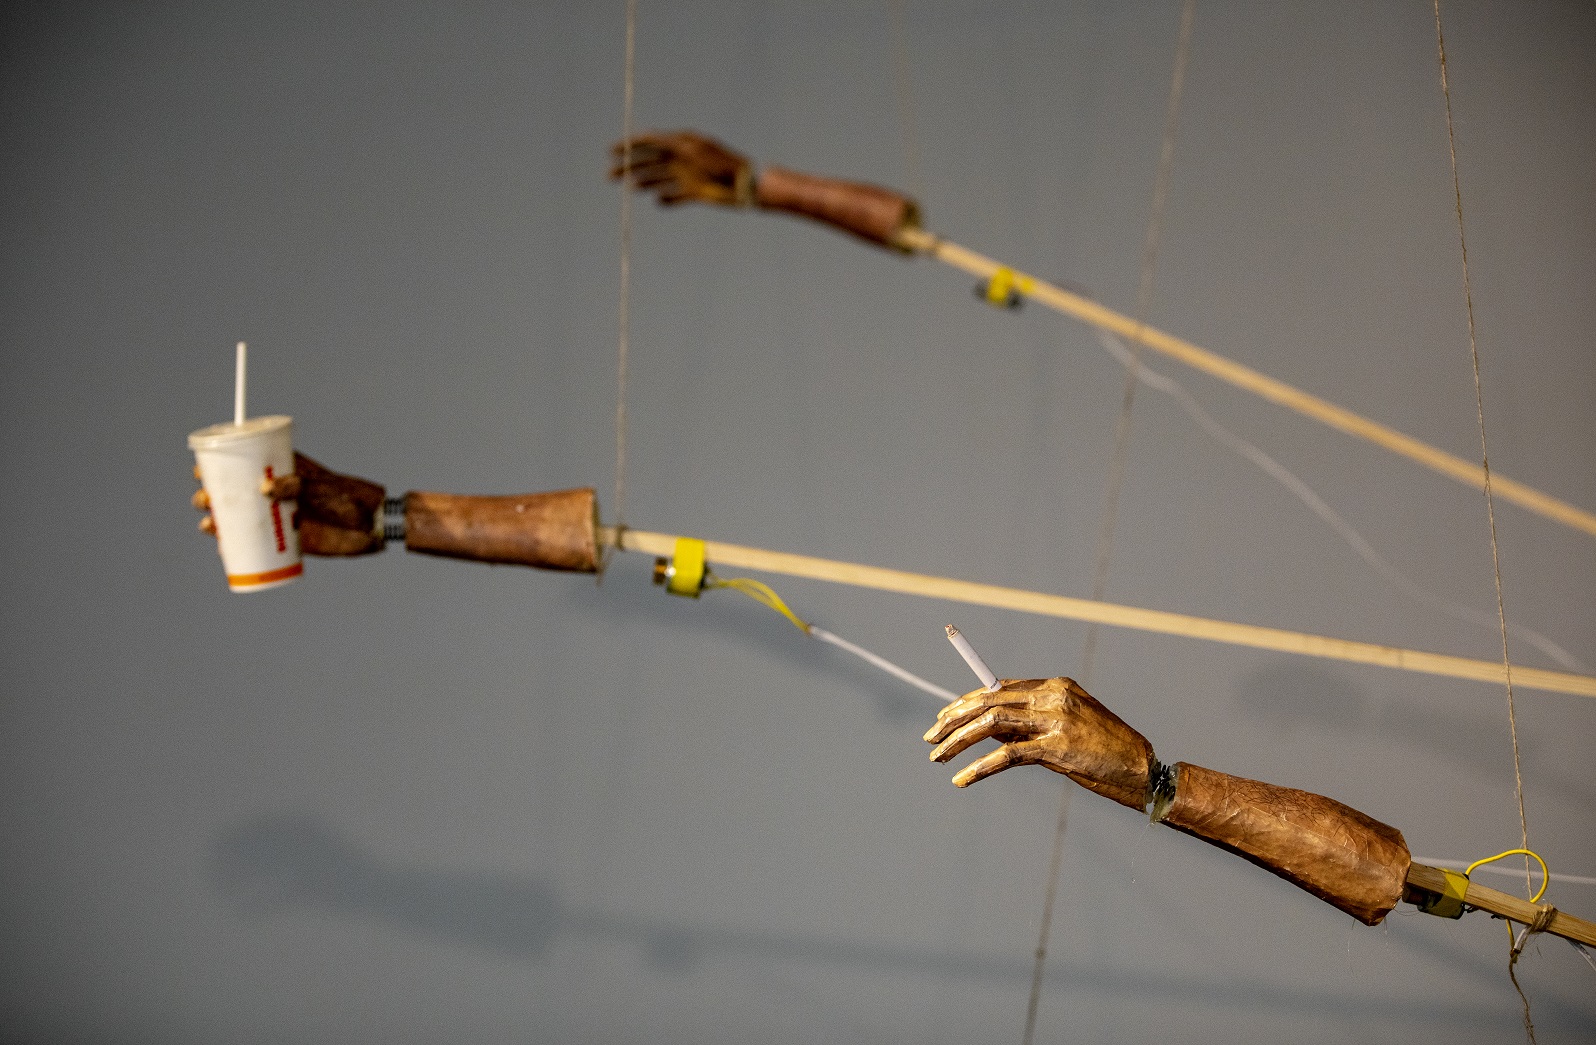 Arms that extend and move mechanically with the help of strings. The arms are made of sticks but have realistic hands. One hand holds a Burger King mug and two others holds cigarettes.